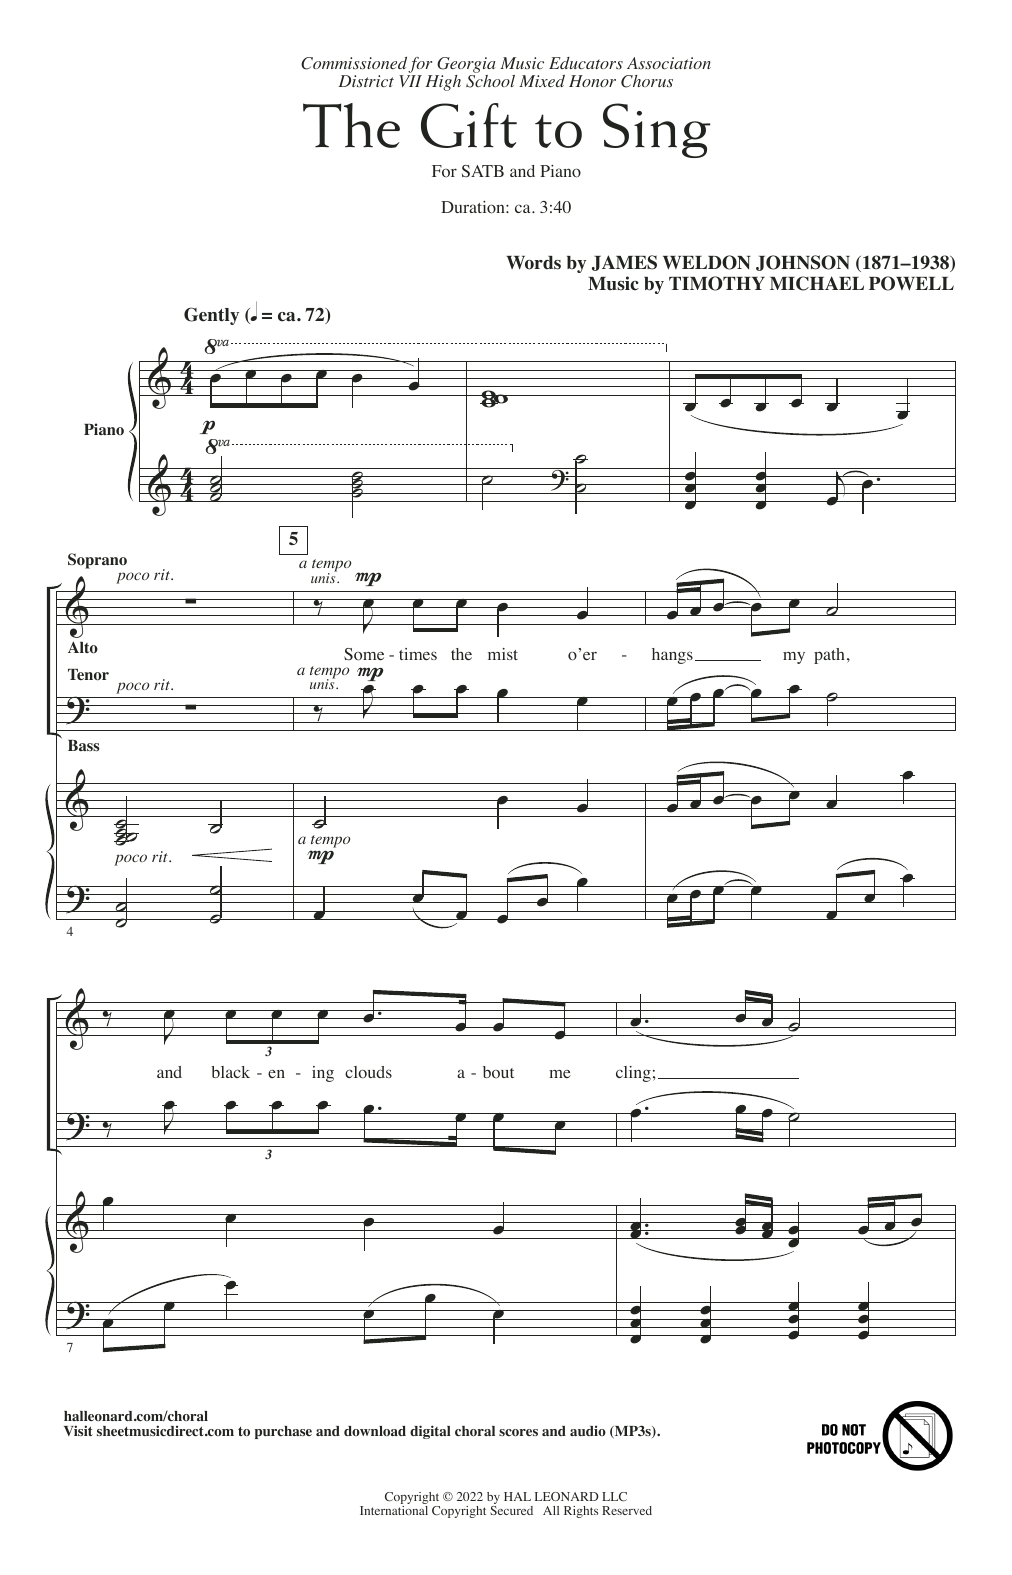 Download James Weldon Johnson and Timothy Mic The Gift To Sing Sheet Music